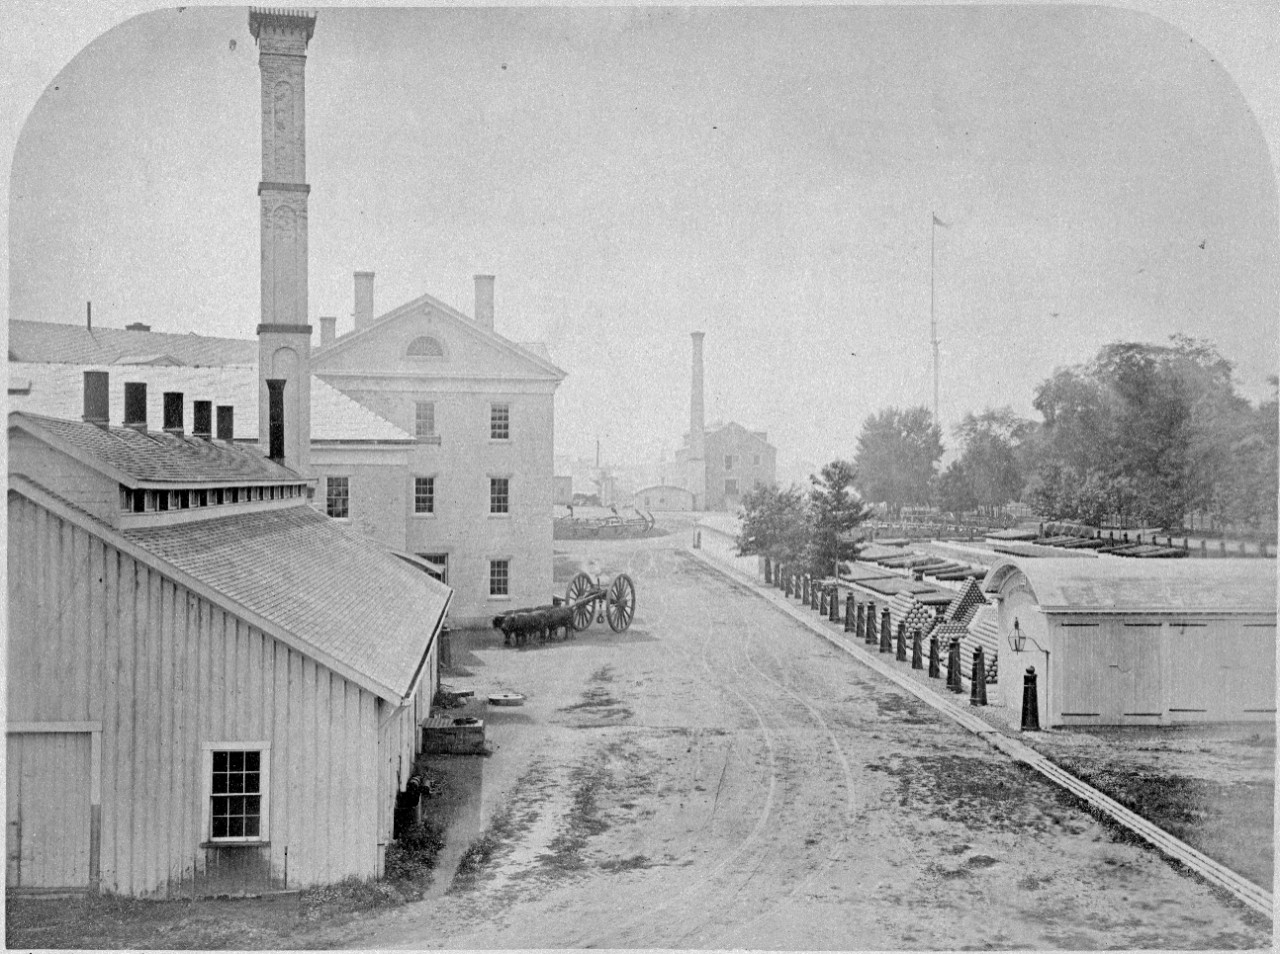 28 photos, mounted on cardboard, showing scenes at the Portsmouth Navy Yard, New Hampshire, circa 1876. Scenes include: floating drydock, offices and buildings, cranes, saluting battery, Marine barracks, park with cannon and stacked shot, bridges, fire engine, docked warships including USS Marion. Most photos have been assigned NH numbers.